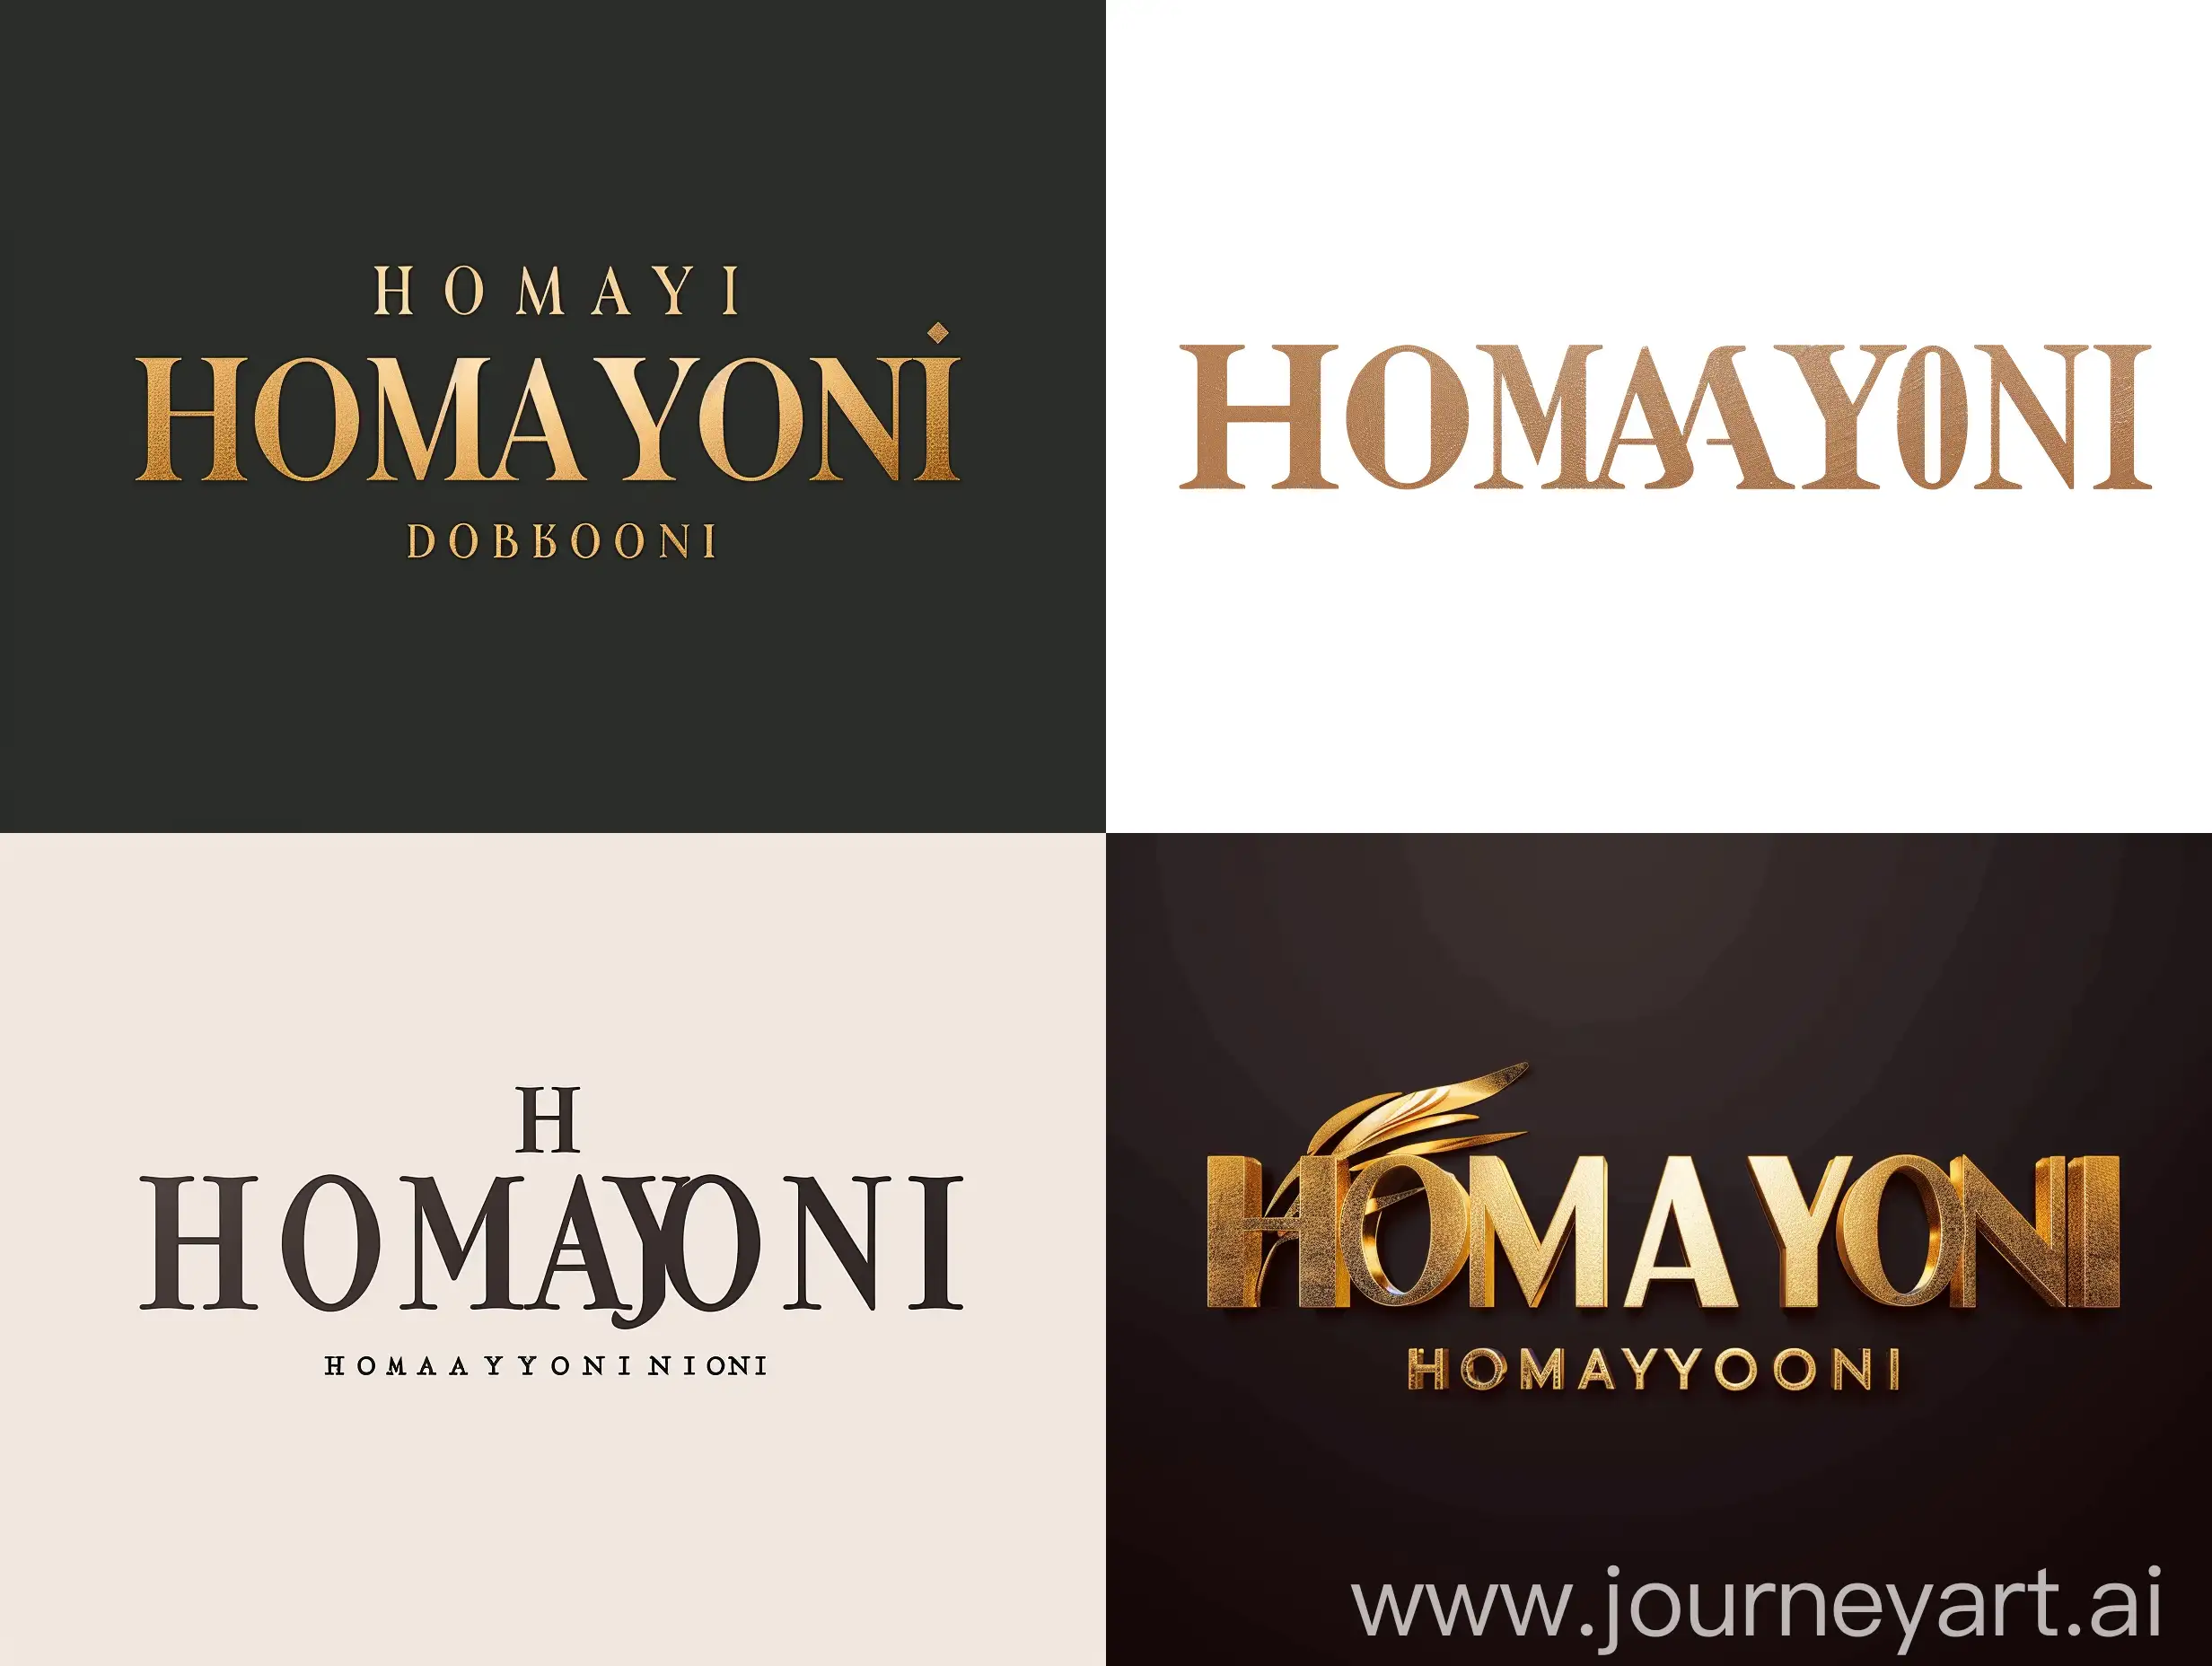 Sure! Here is a brief description of the logo design with the text "HOMAYONI" in large English letters:  Title: HOMAYONI Logo Design Description: The HOMAYONI logo features the name "HOMAYONI" prominently displayed in bold, elegant English letters. The design exudes a sense of sophistication and modernity, making it visually appealing and memorable. The sleek typography and clean layout enhance the overall aesthetic of the logo, making it suitable for various applications such as branding, marketing, and promotional materials.  I hope this description captures the essence of the logo design. Let me know if you need any further details or modifications.